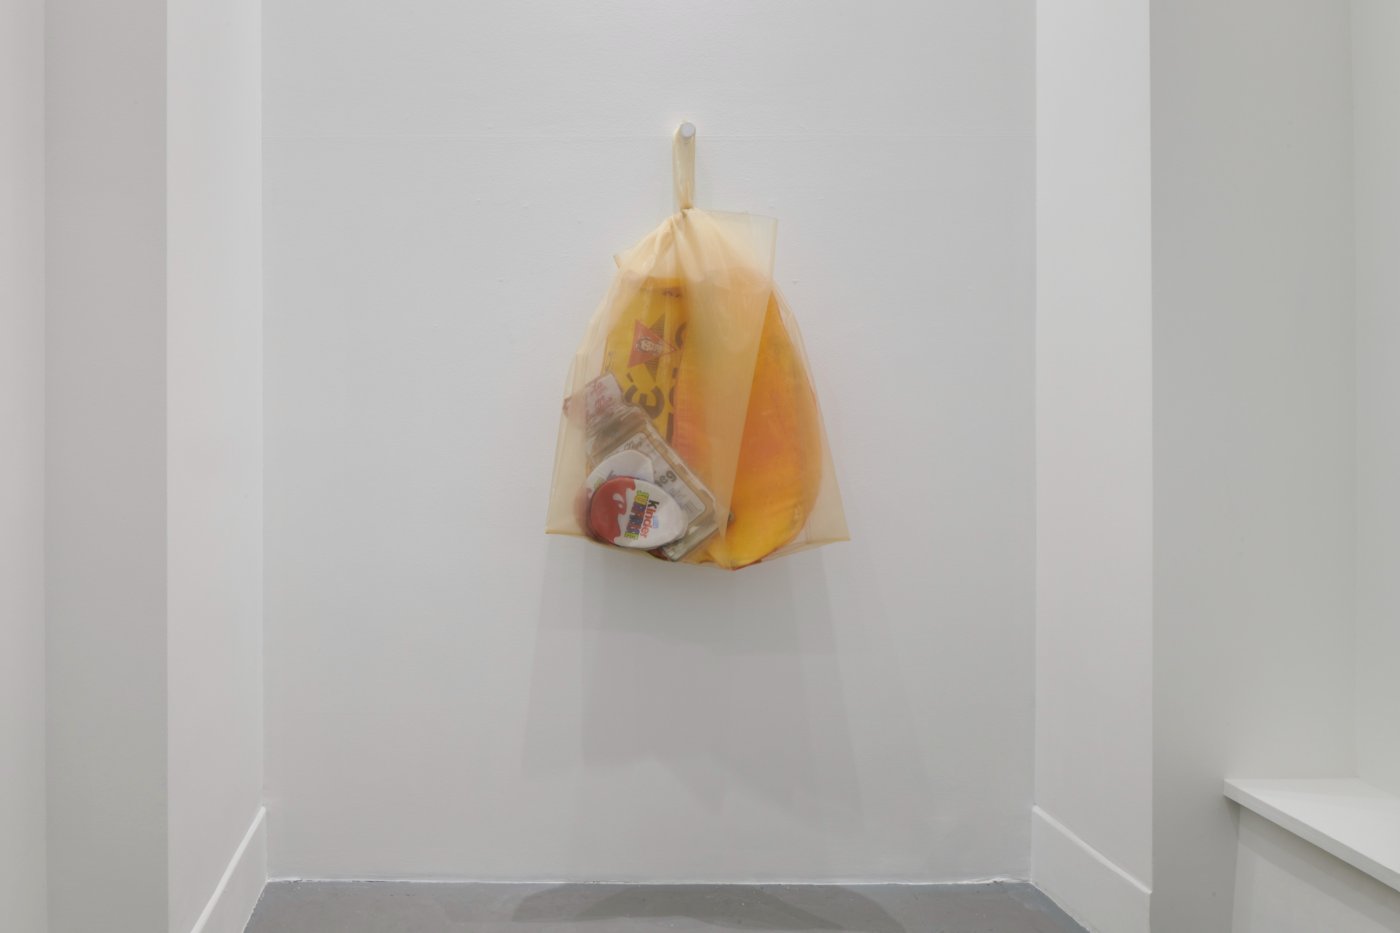 Installation image for Lucia Hierro: Capital M, at Fabienne Levy